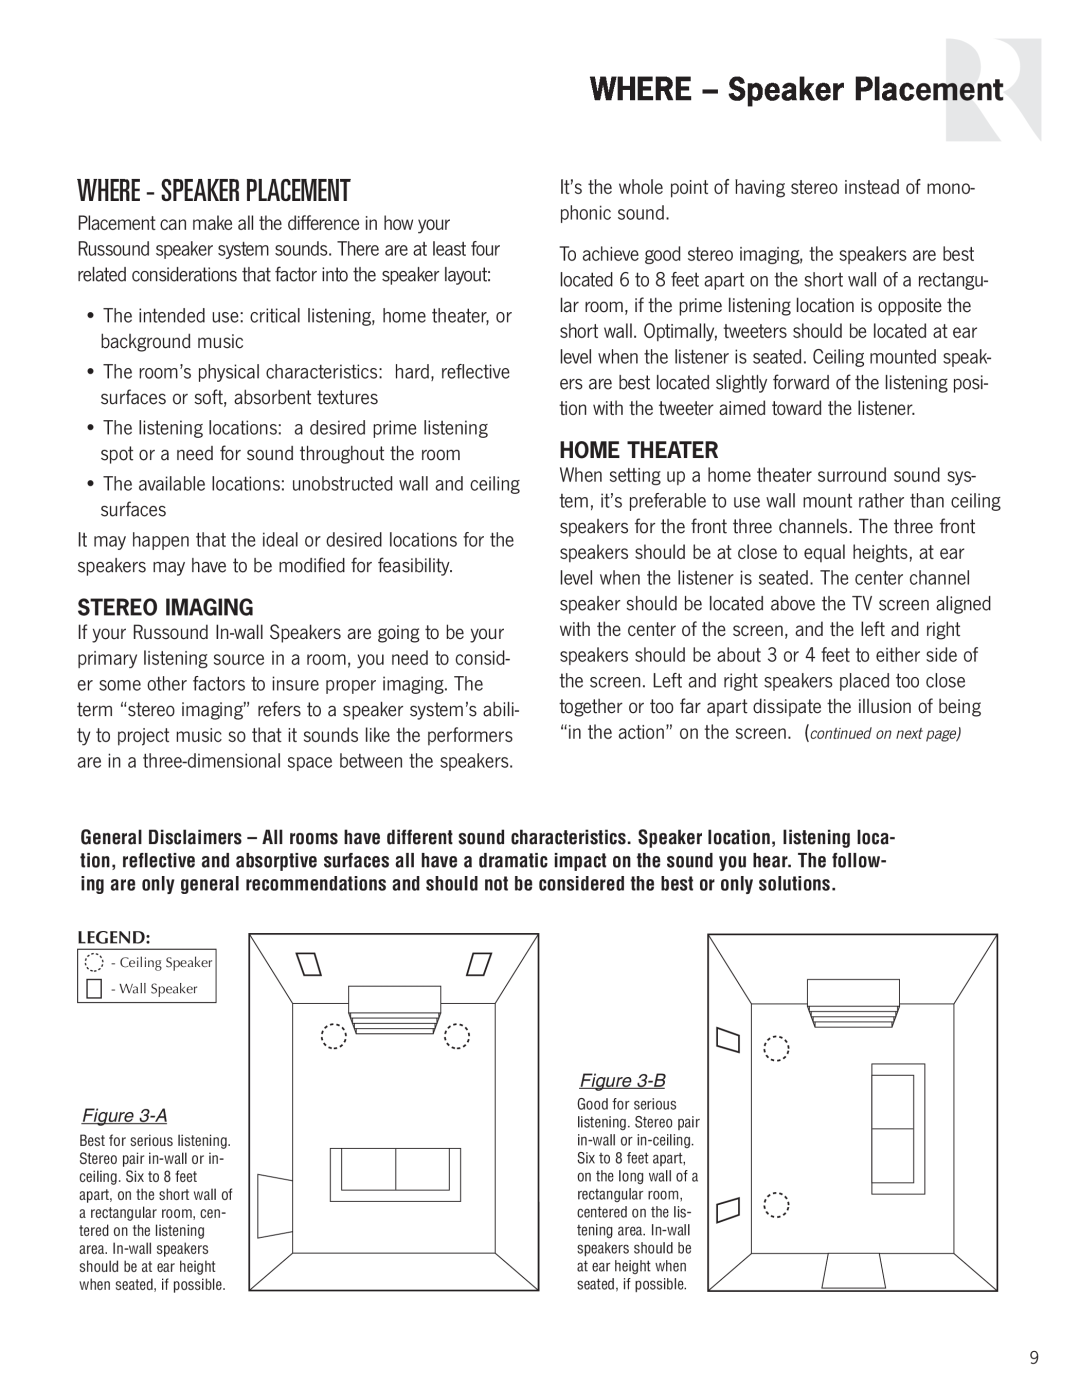 Russound Advantage Series owner manual WHERE - Speaker Placement, Where - Speaker Placement, Stereo Imaging, Home Theater 